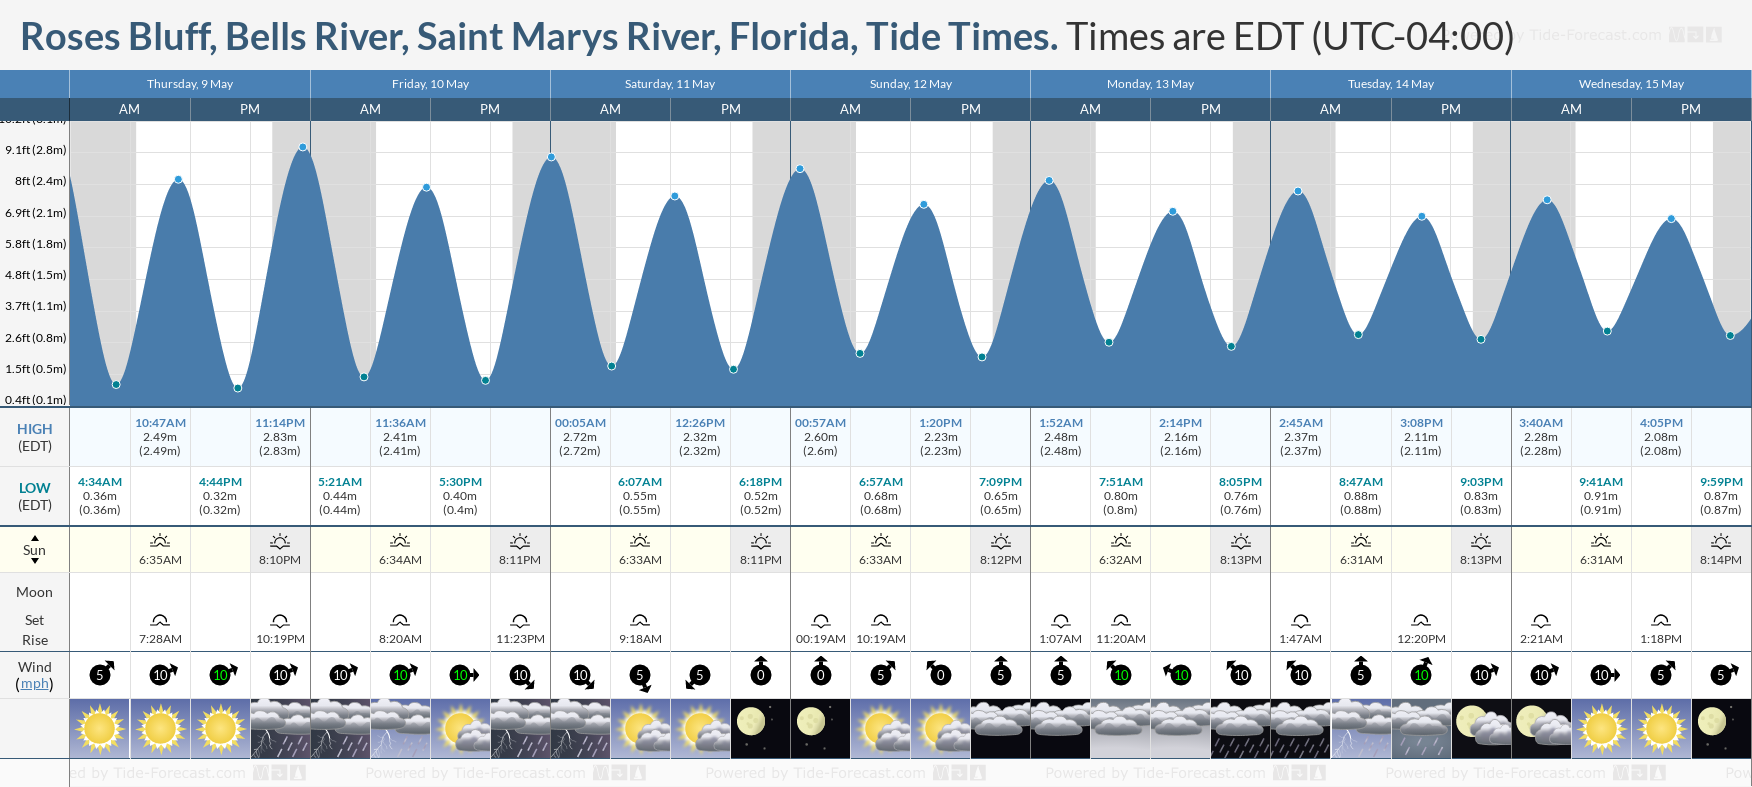 Roses Bluff, Bells River, Saint Marys River, Florida Tide Chart including high and low tide tide times for the next 7 days